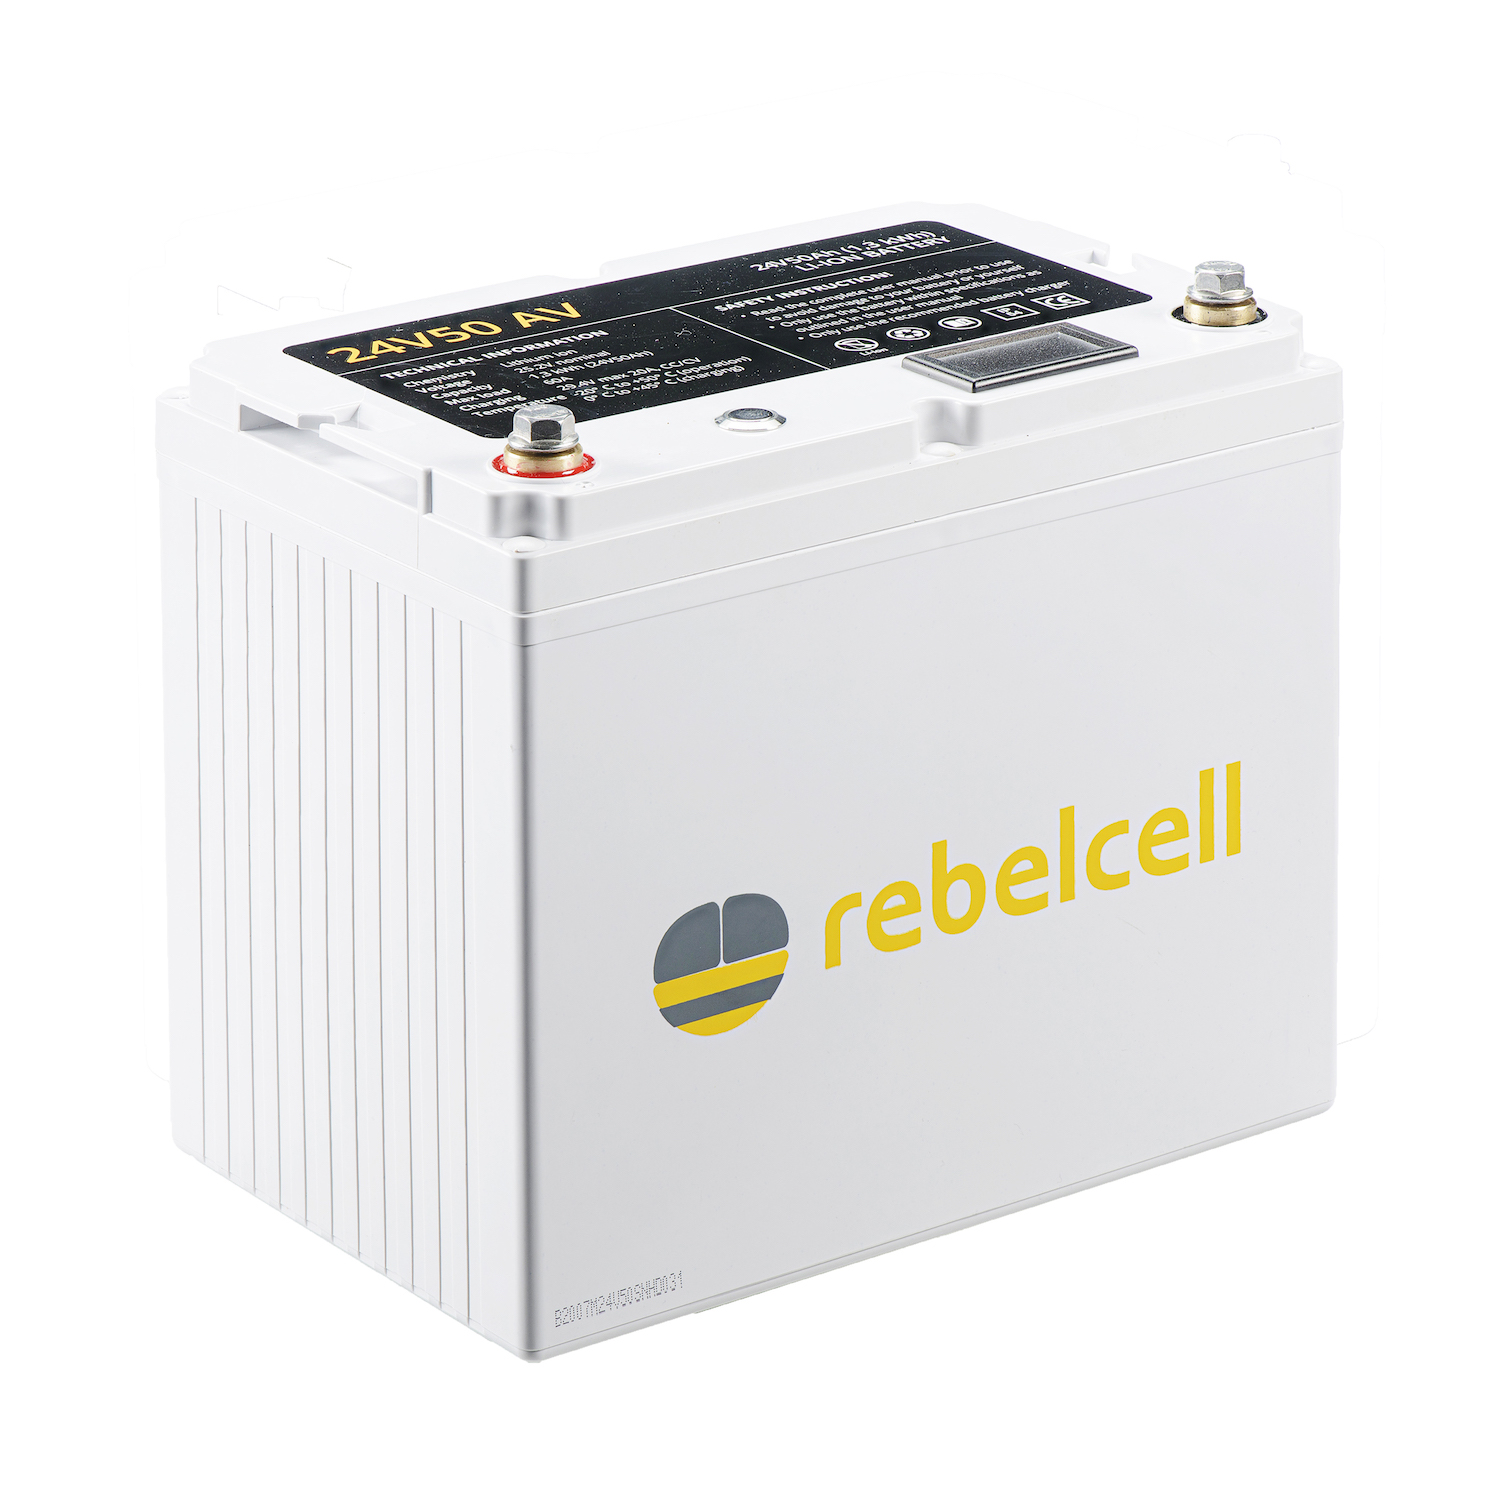 paling ga zo door site Battery 24V50 | Rebelcell | Portable energy for outdoor use